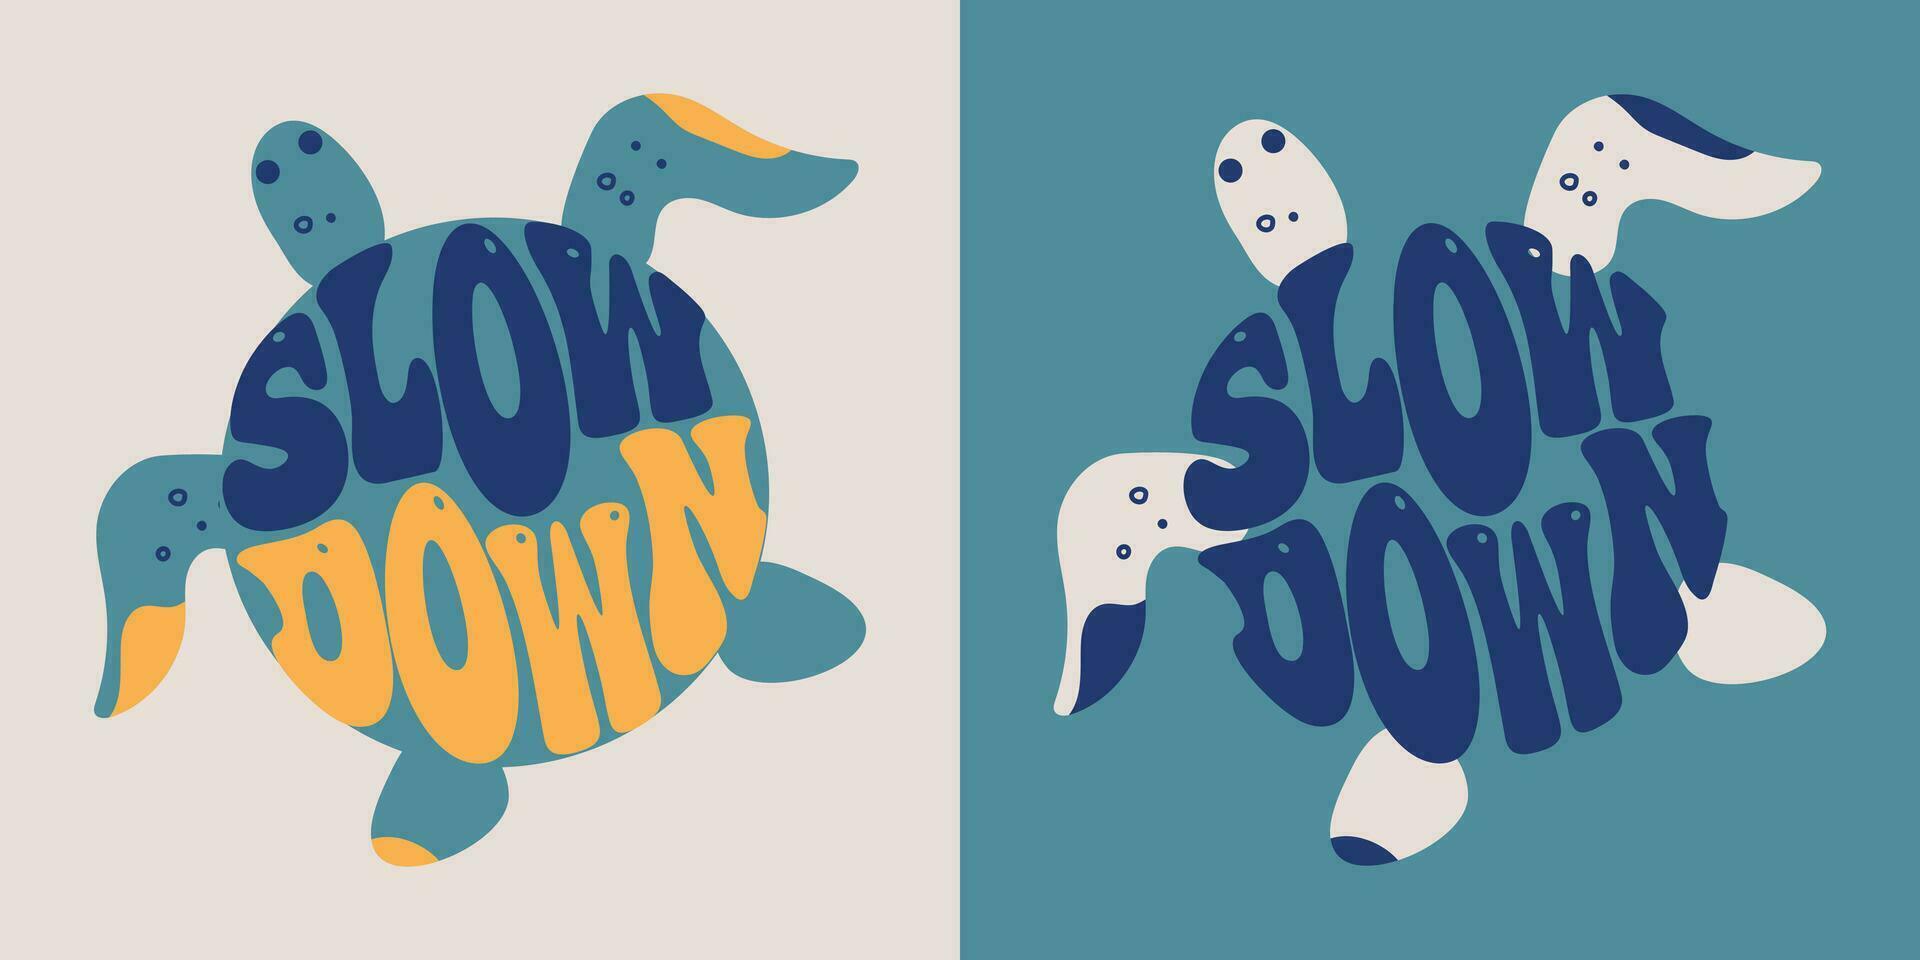 Slow down. Retro groovy lettering. Retro slogan in round shape.Vector turtle icon illustration for greeting card, t shirt, print, stickers, posters design on white background. vector